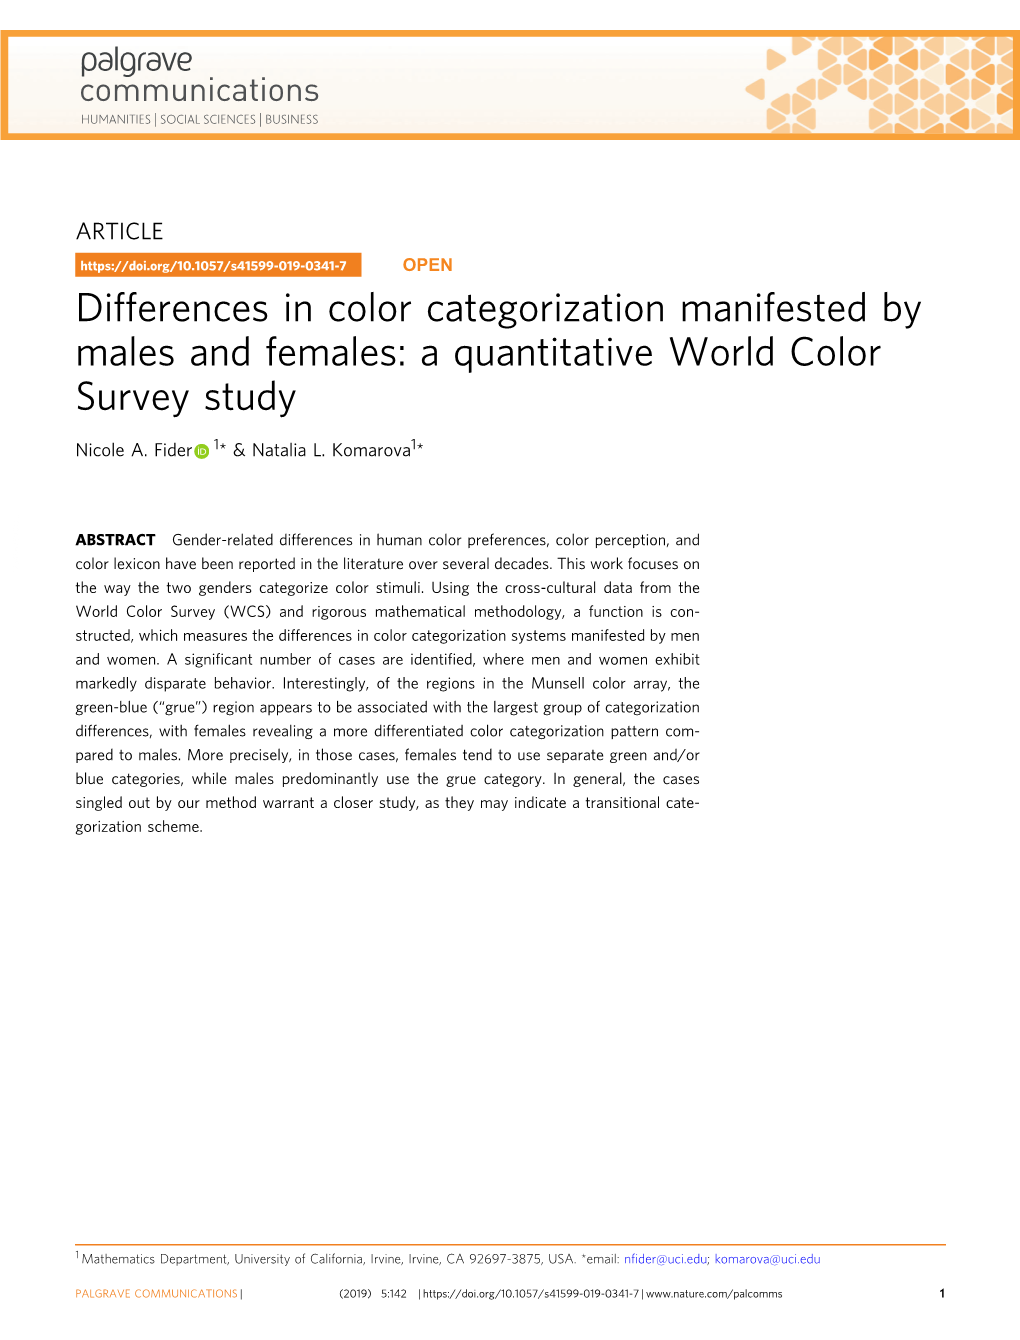 Differences in Color Categorization Manifested by Males and Females: a Quantitative World Color Survey Study